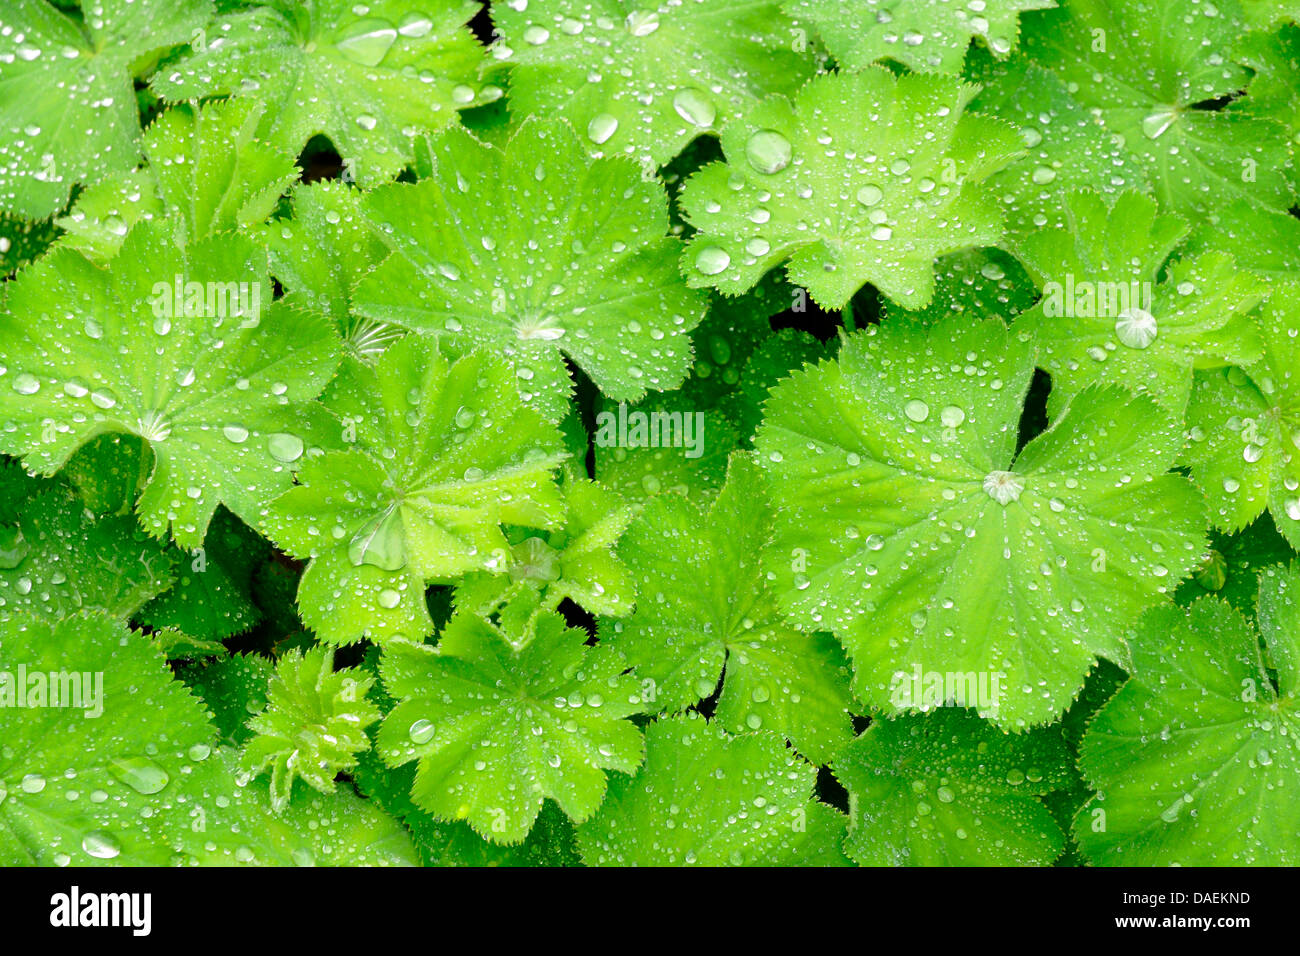 common lady's-mantle (Alchemilla vulgaris), leaves with raindrops, Germany Stock Photo